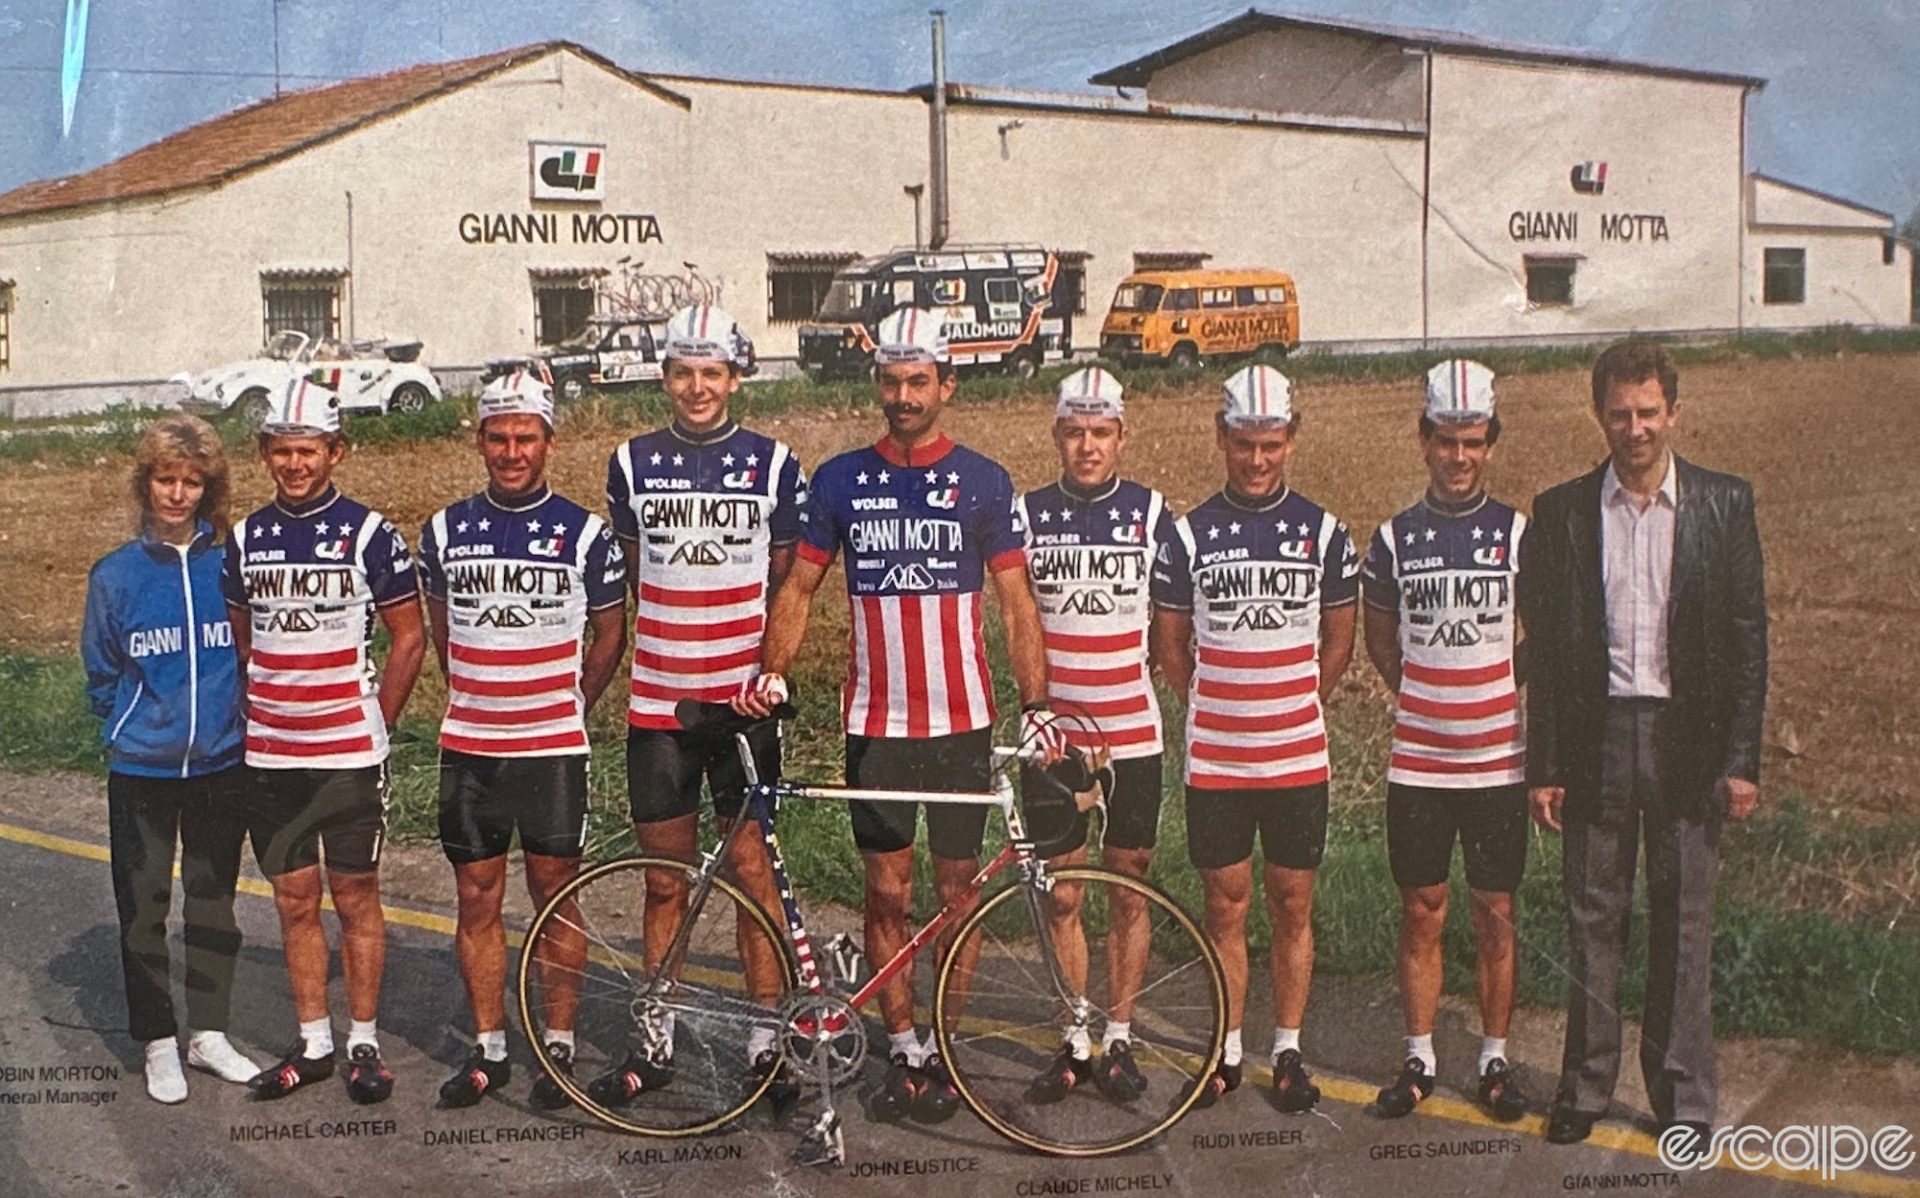 Members of the Gianni Motta team pose in front of the bike factory in Italy. There are eight riders, in the stars-and-stripes motif. John Eustice is in the center, flanked by Daniel Franger, Michael Carter, and director Robin Morton to his right, and Claude Michely, Rudi Weber, Greg Saunders, and Motta to his left. Morton is wearing a blue Gianni Motta trainer and black pants, and Motta is in a black leather blazer. A Motta bicycle stands in front of the team.